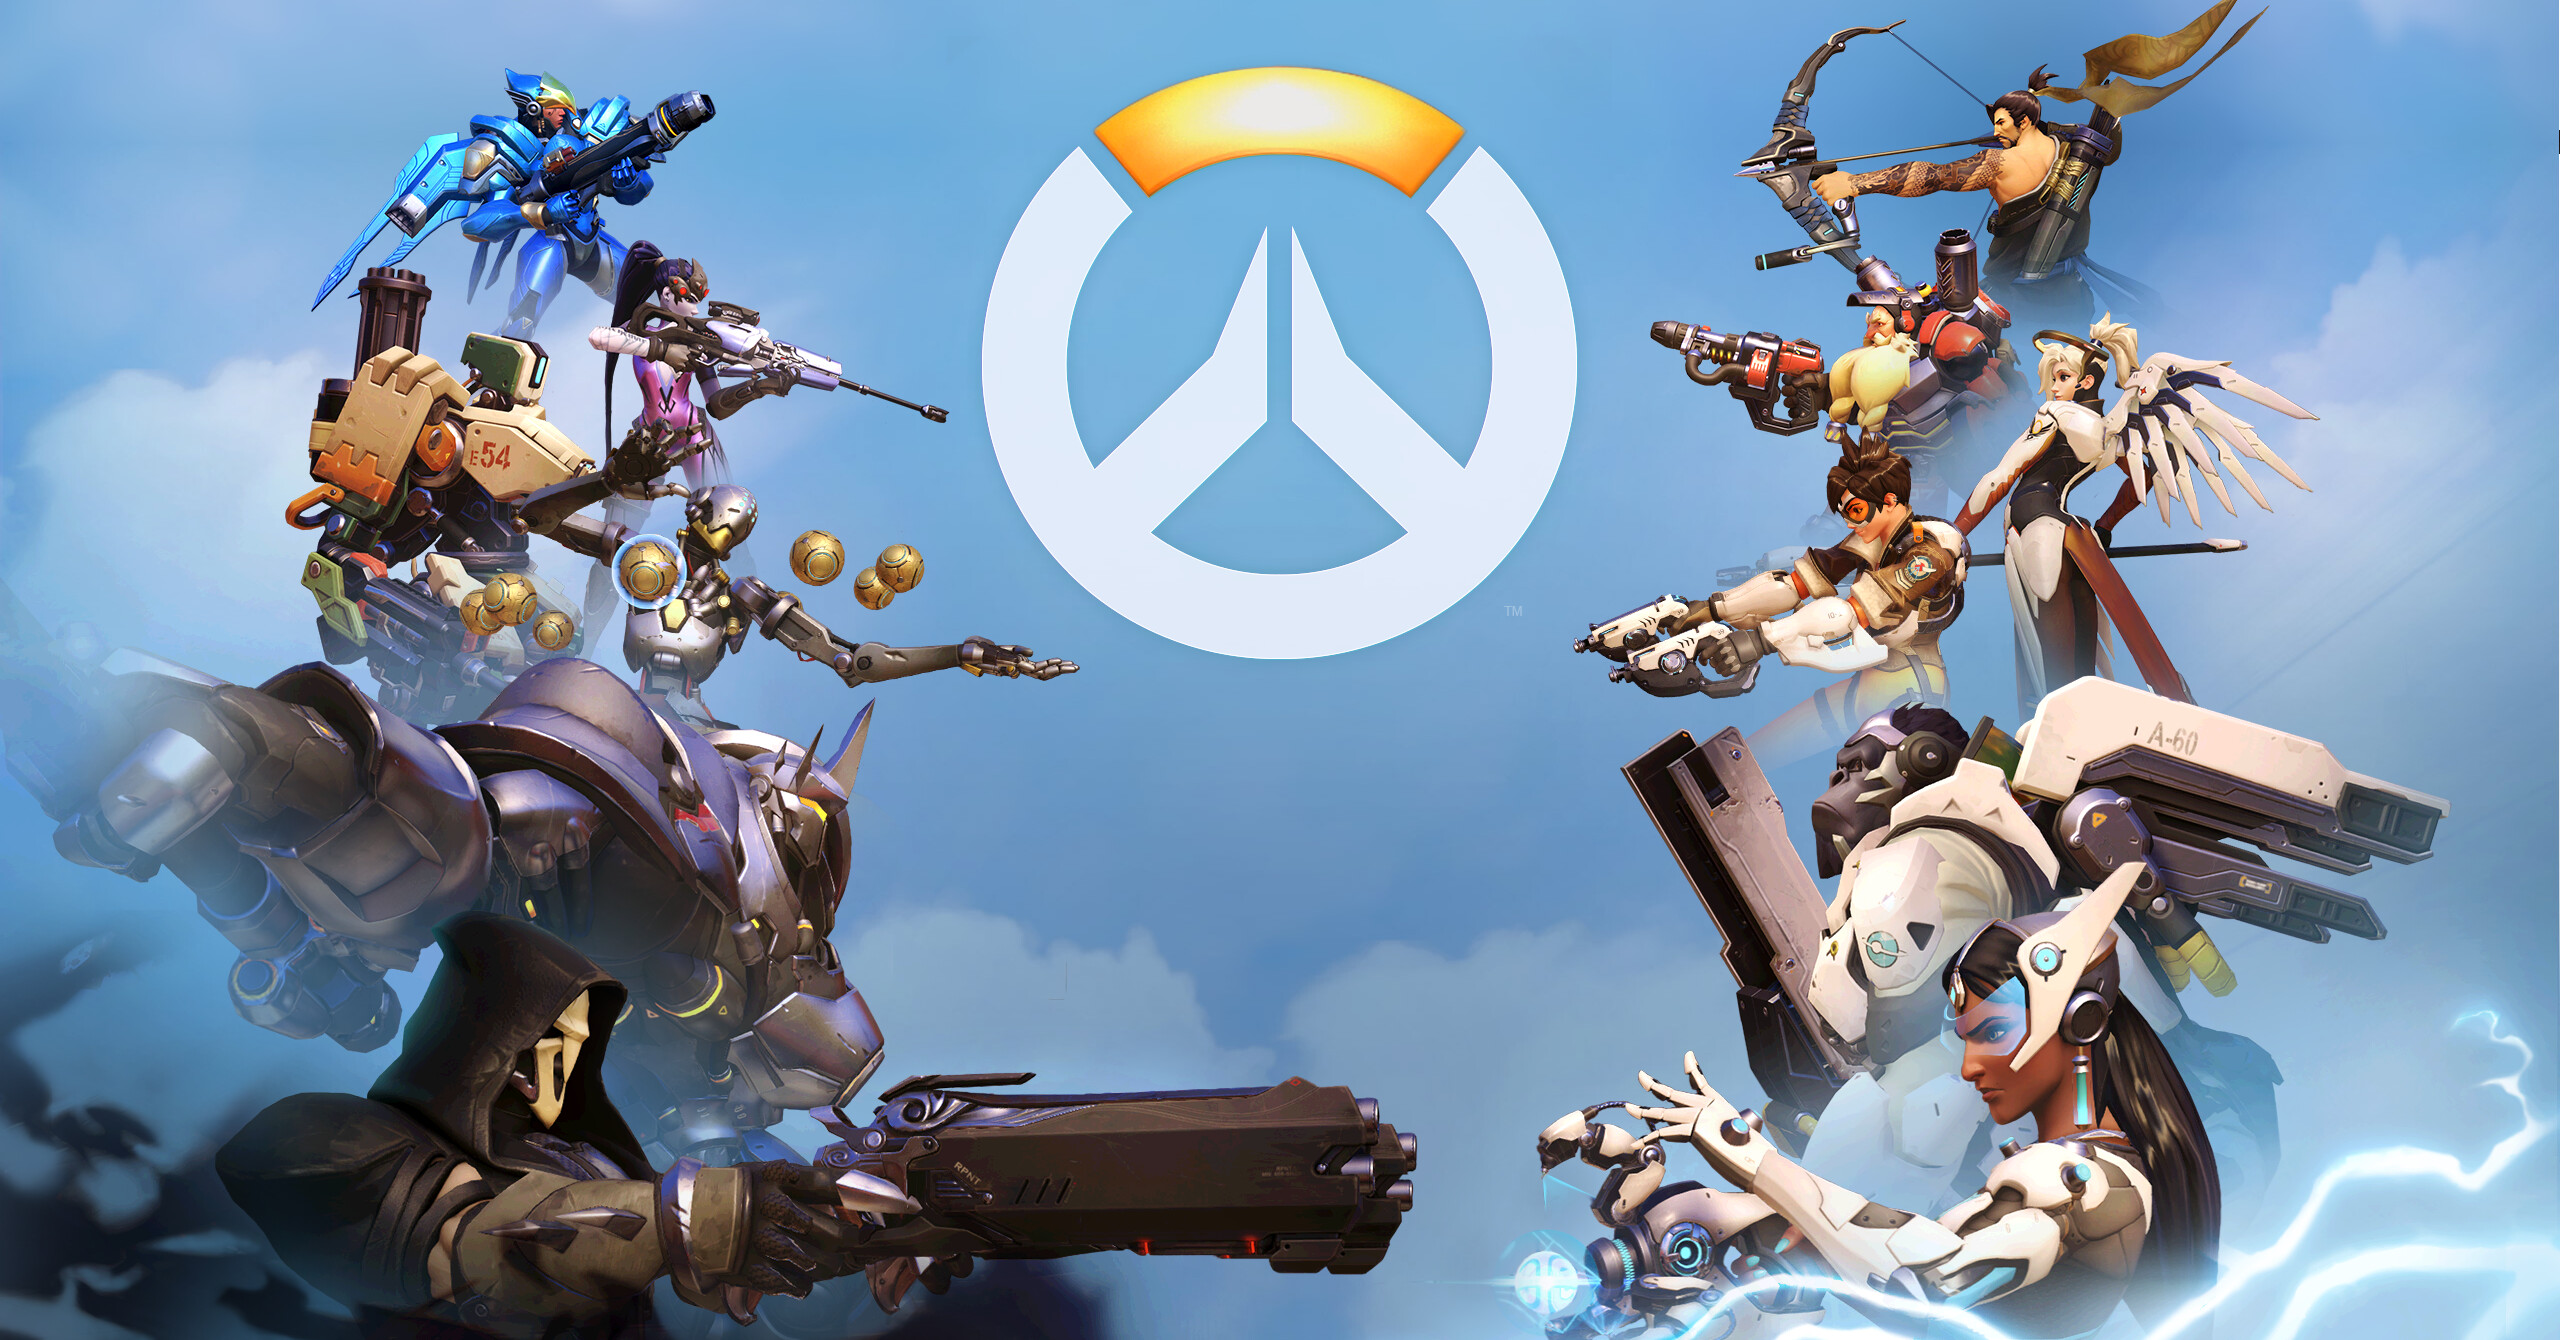 Overwatch: The first Blizzard's attempt at making an FPS game. 2560x1340 HD Background.